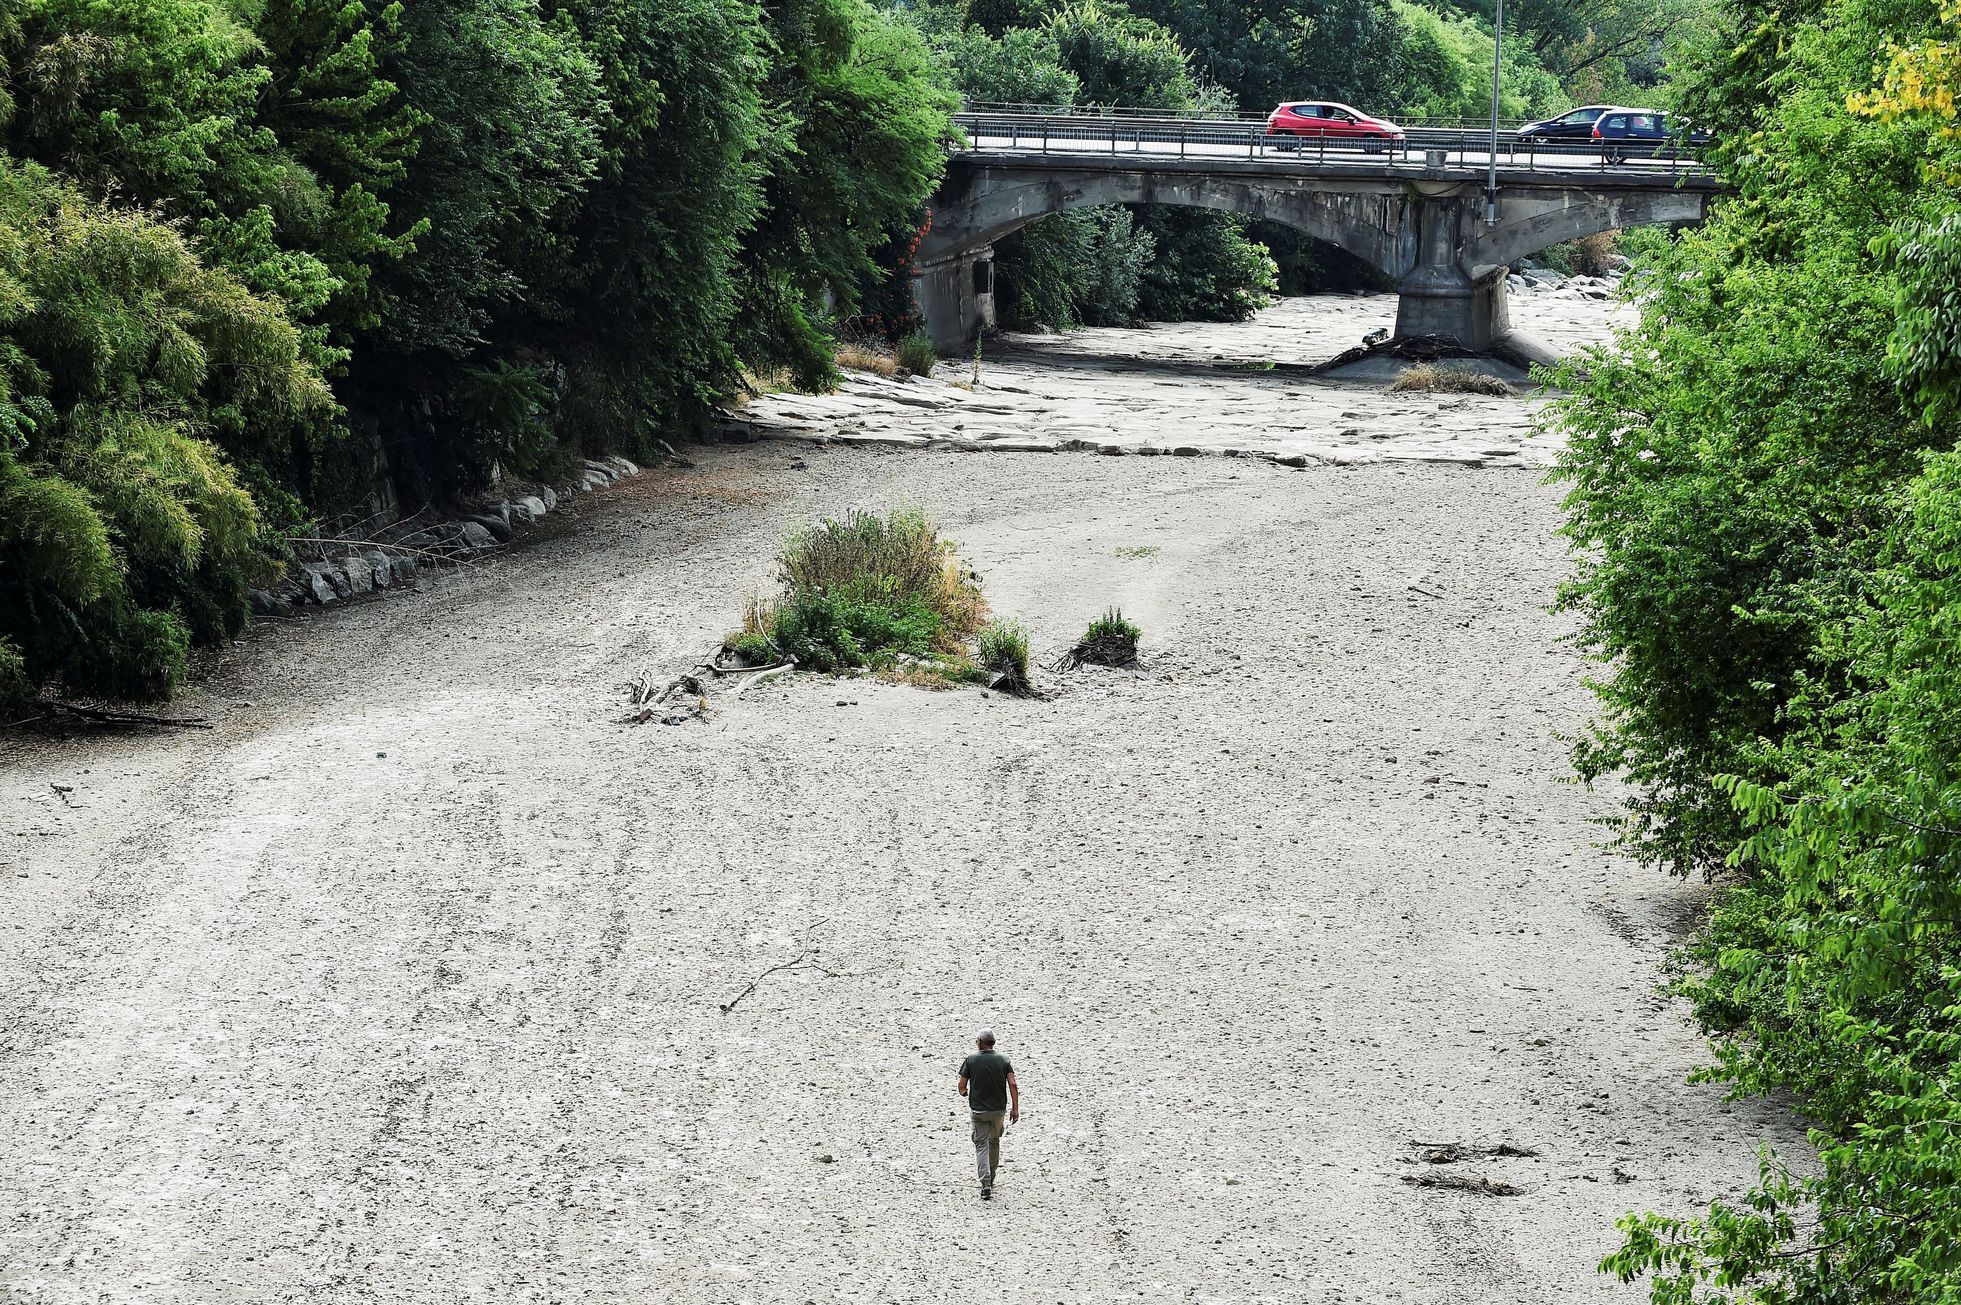 The longest Po river in Italy is drying up.  This threatens traditional rice and tomato cultivation